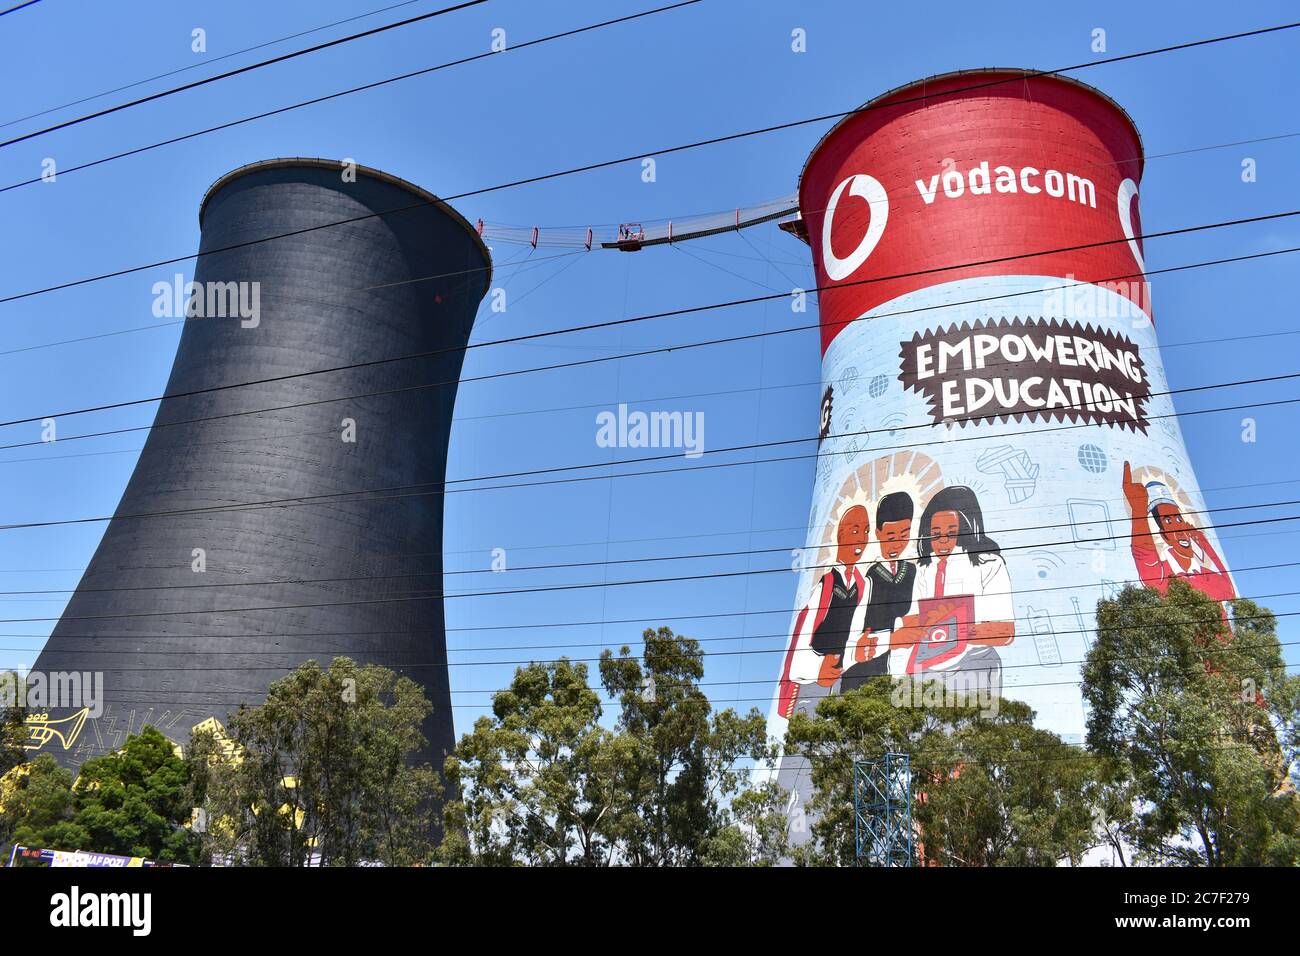 The Orlando Cooling Towers in  a suburb of Soweto. One is brightly decorated with advertising and the other is painted black. Against a clear blue sky. Stock Photo